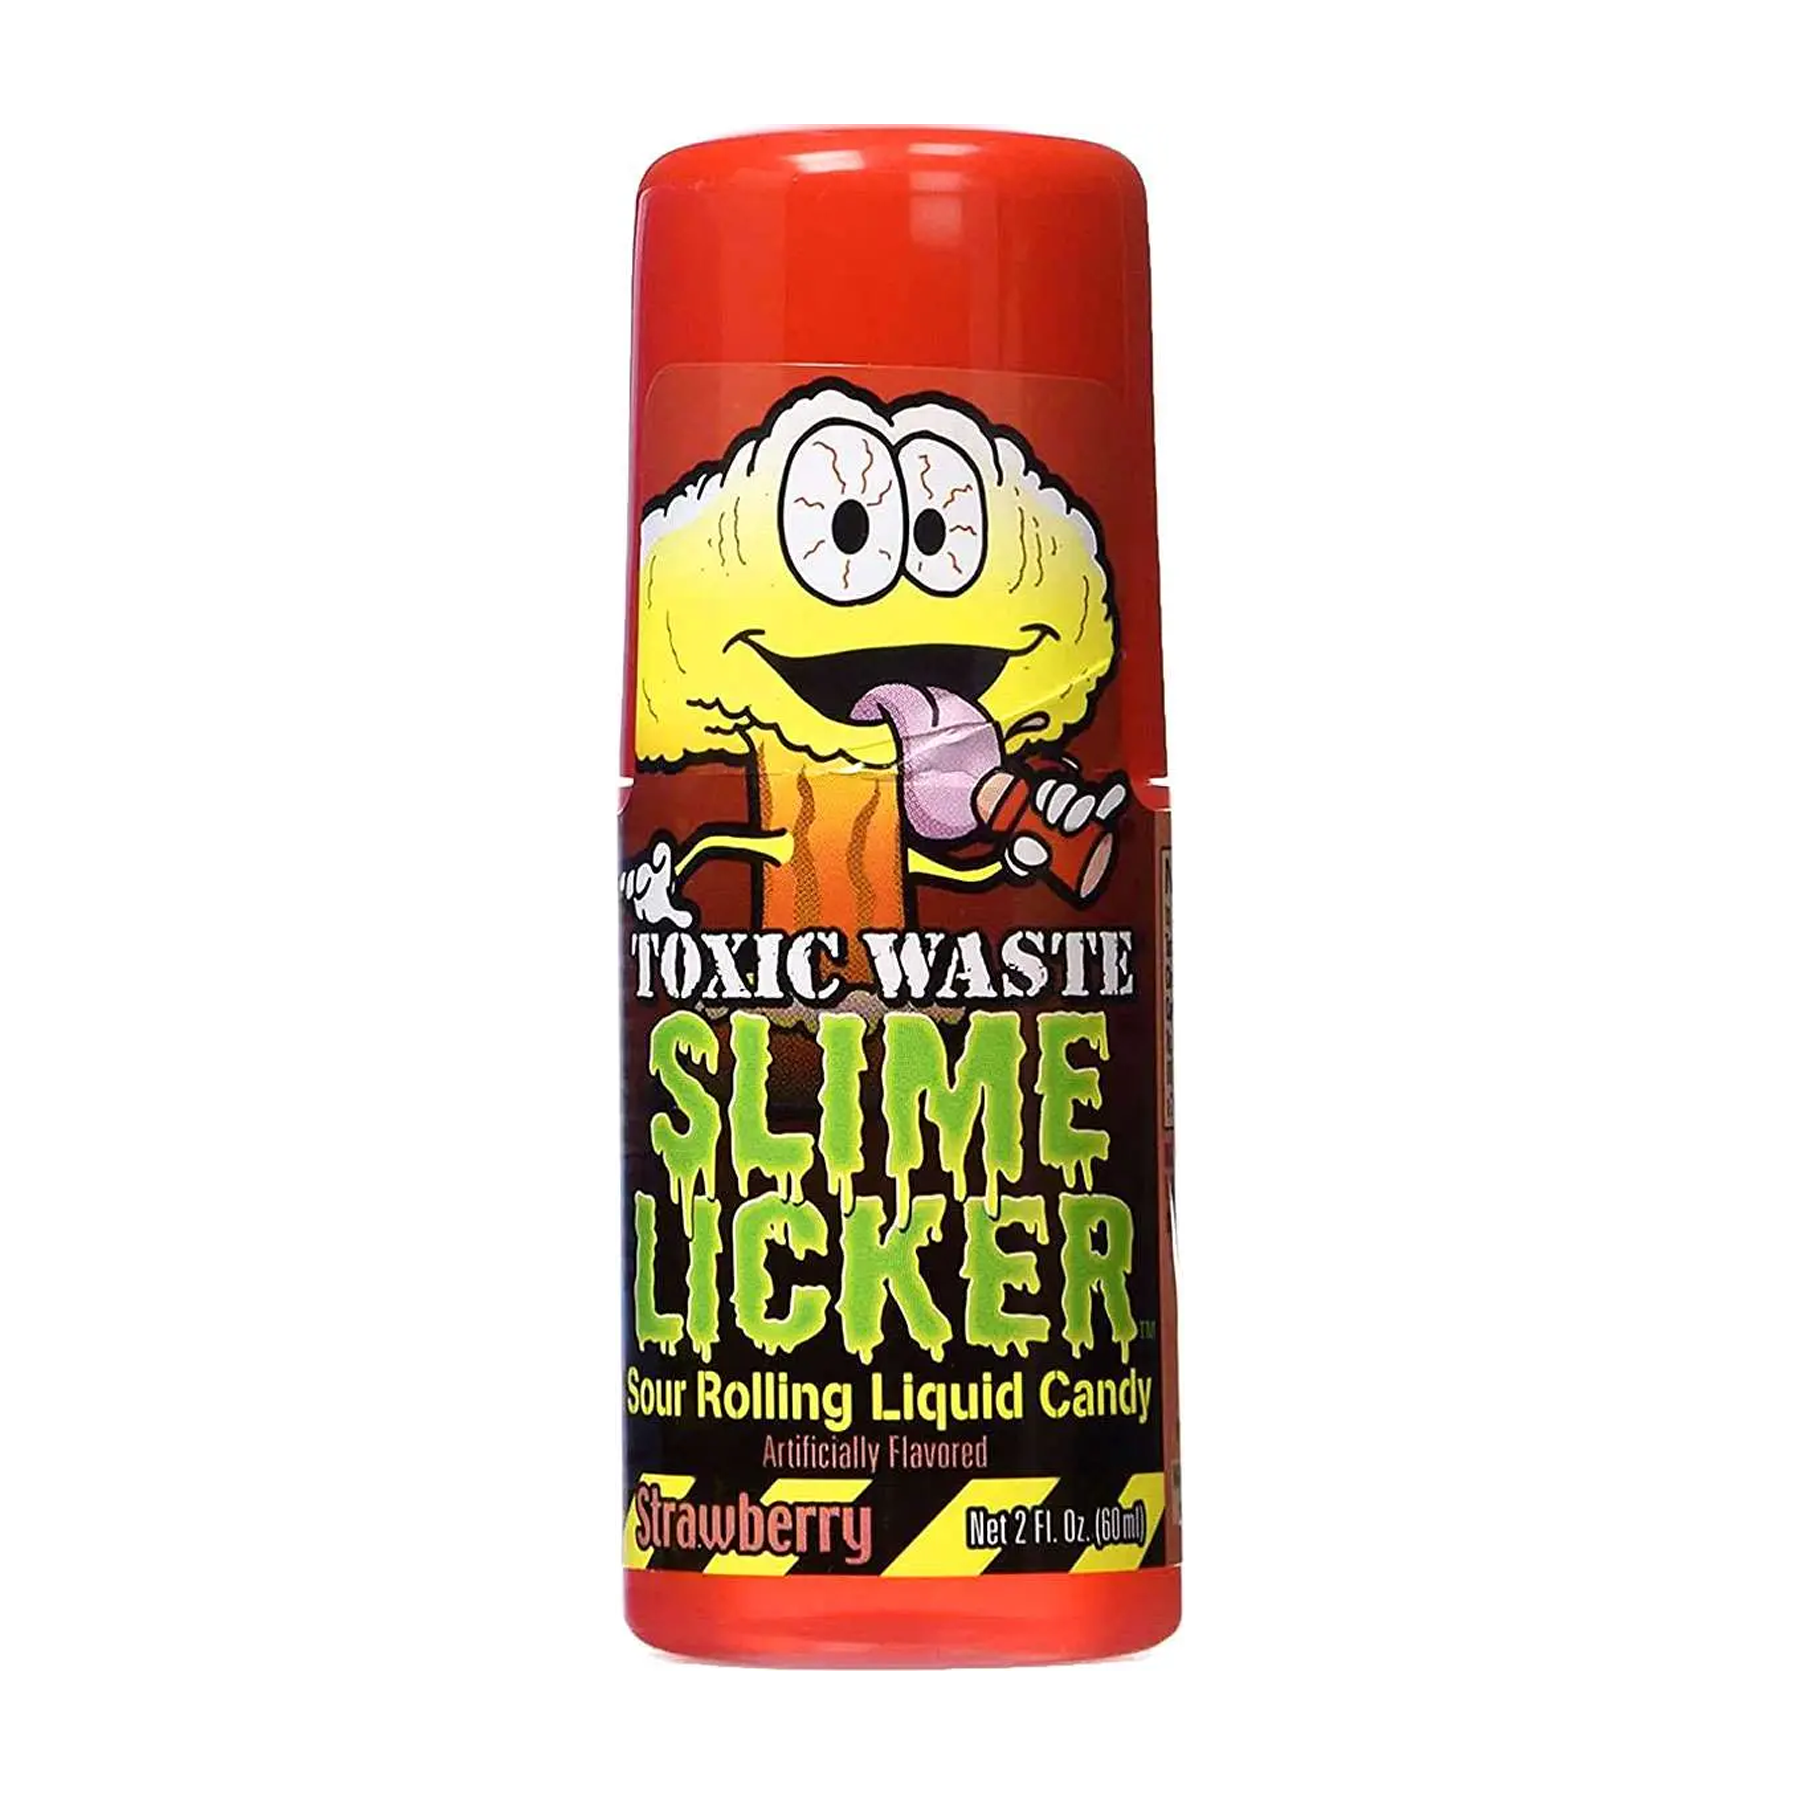 Toxic Waste Slime Licker Strawberry Sour Rolling Liquid Candy